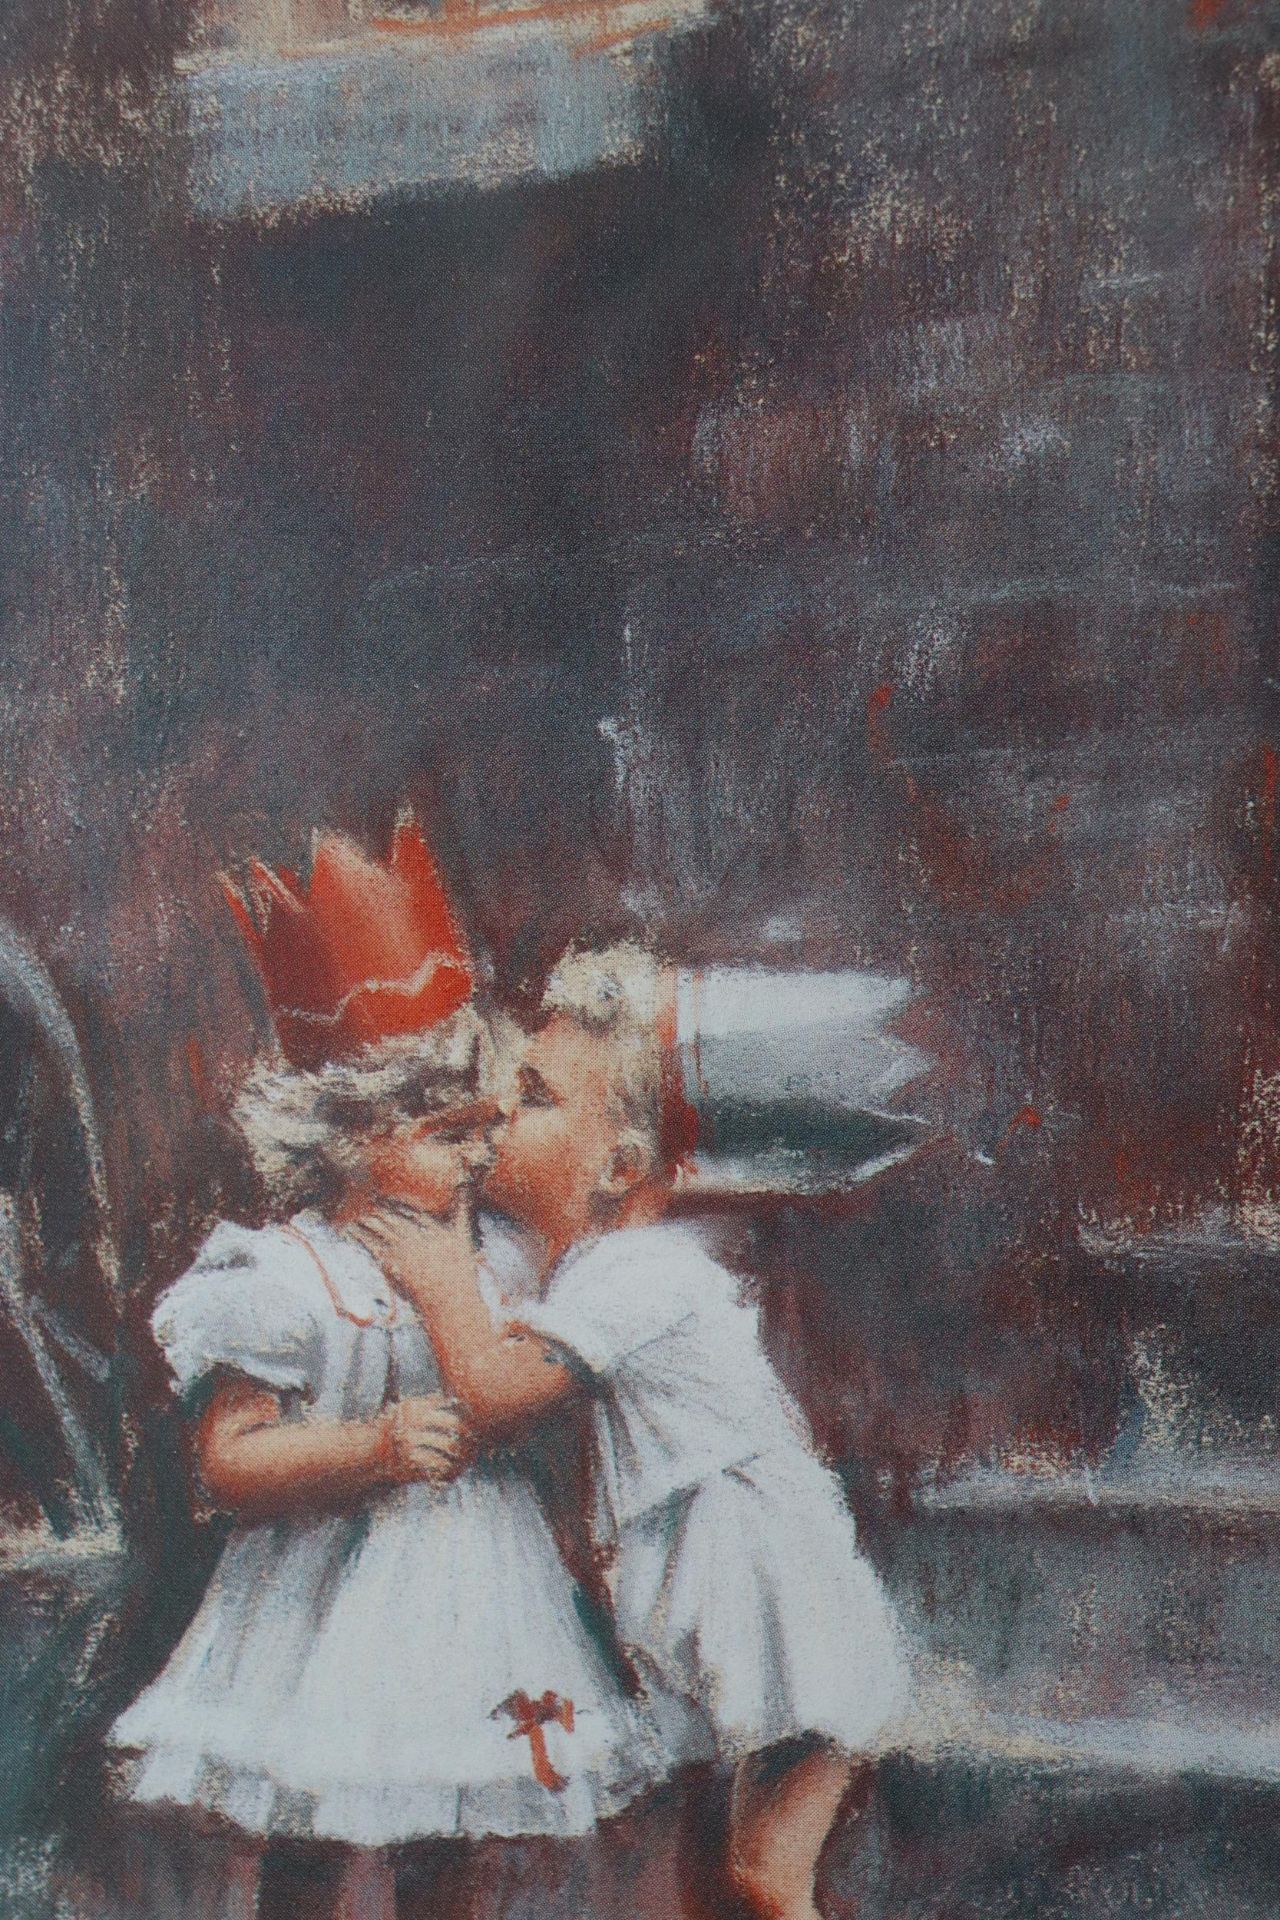 A SIGNED MARC GRIMSHAW PRINT OF A LITTLE GIRL AND BOY KISSING - Image 3 of 6